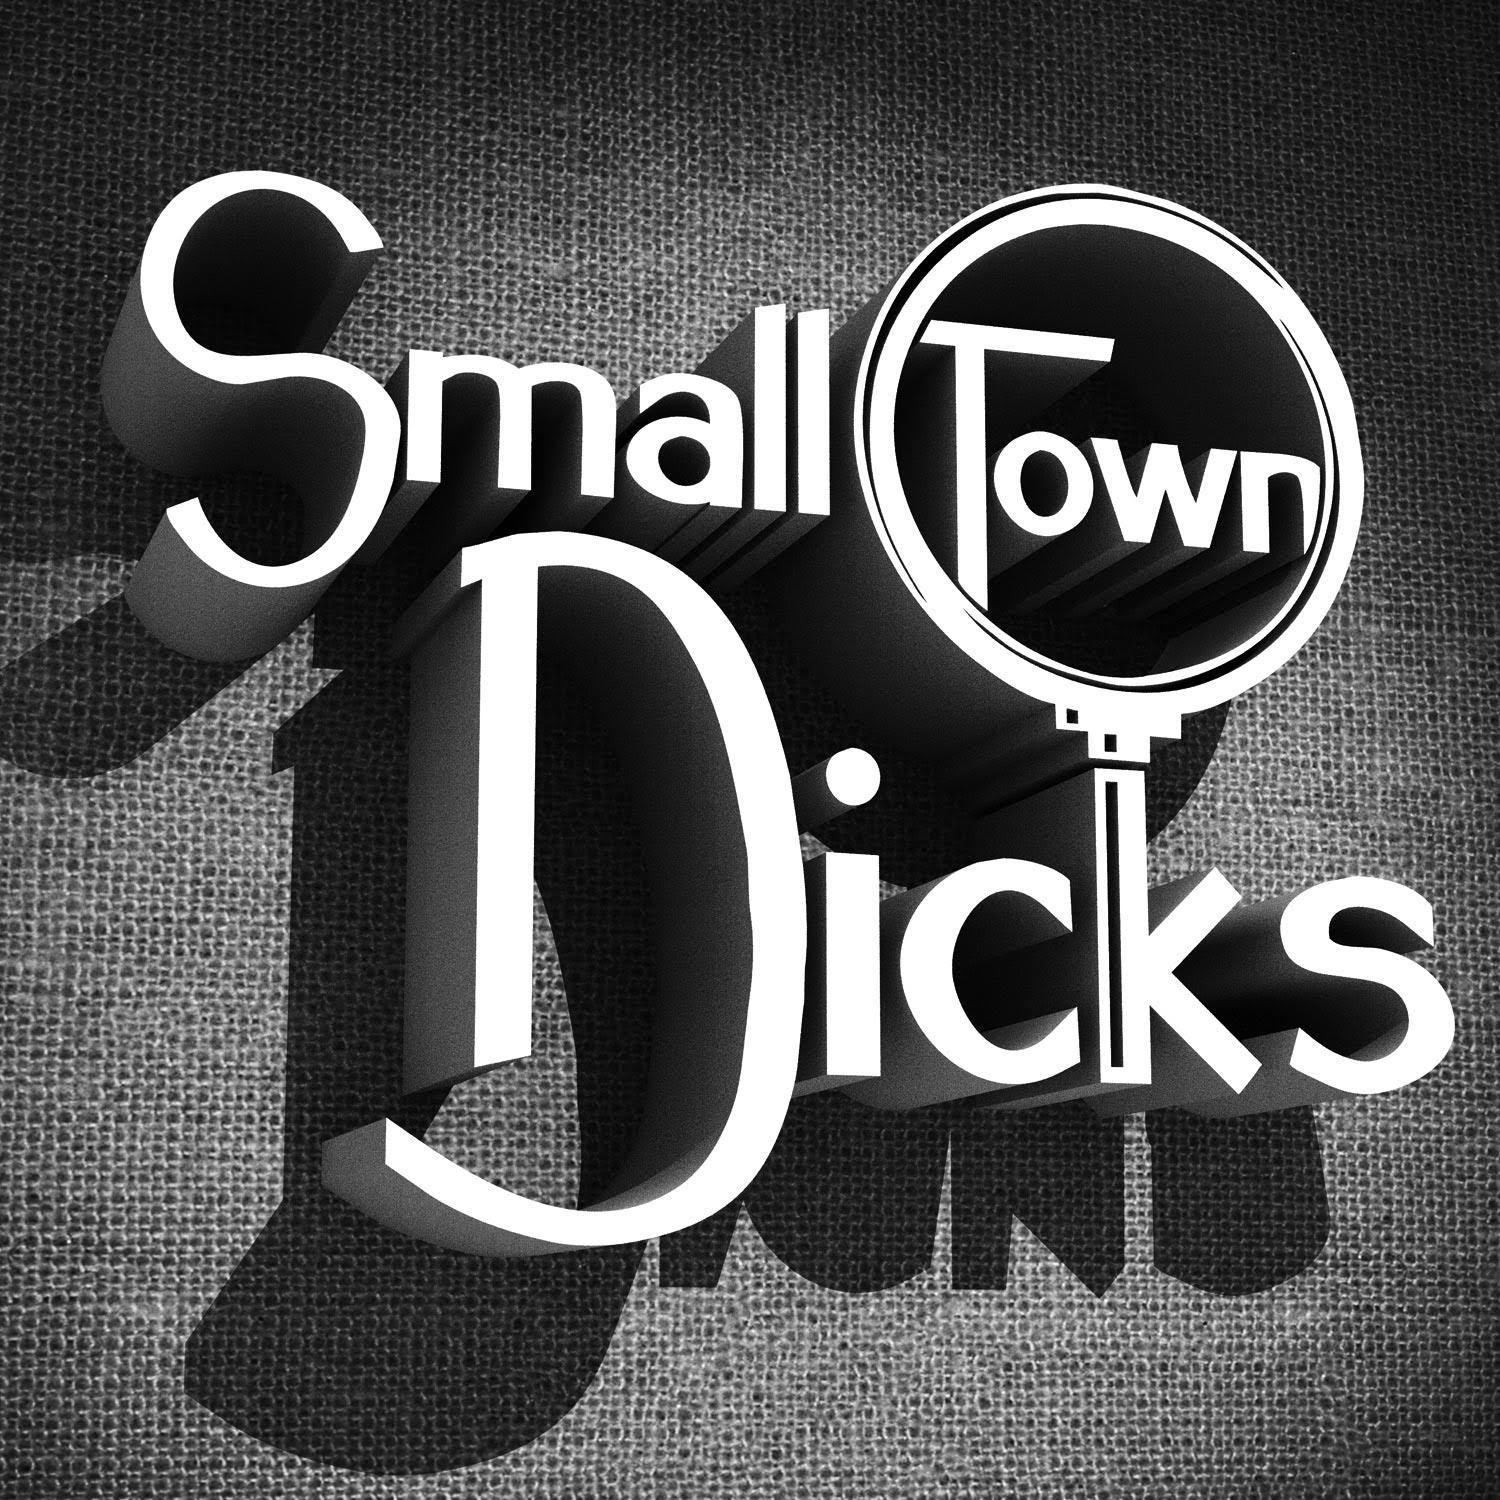 Small Town Dicks Podcast